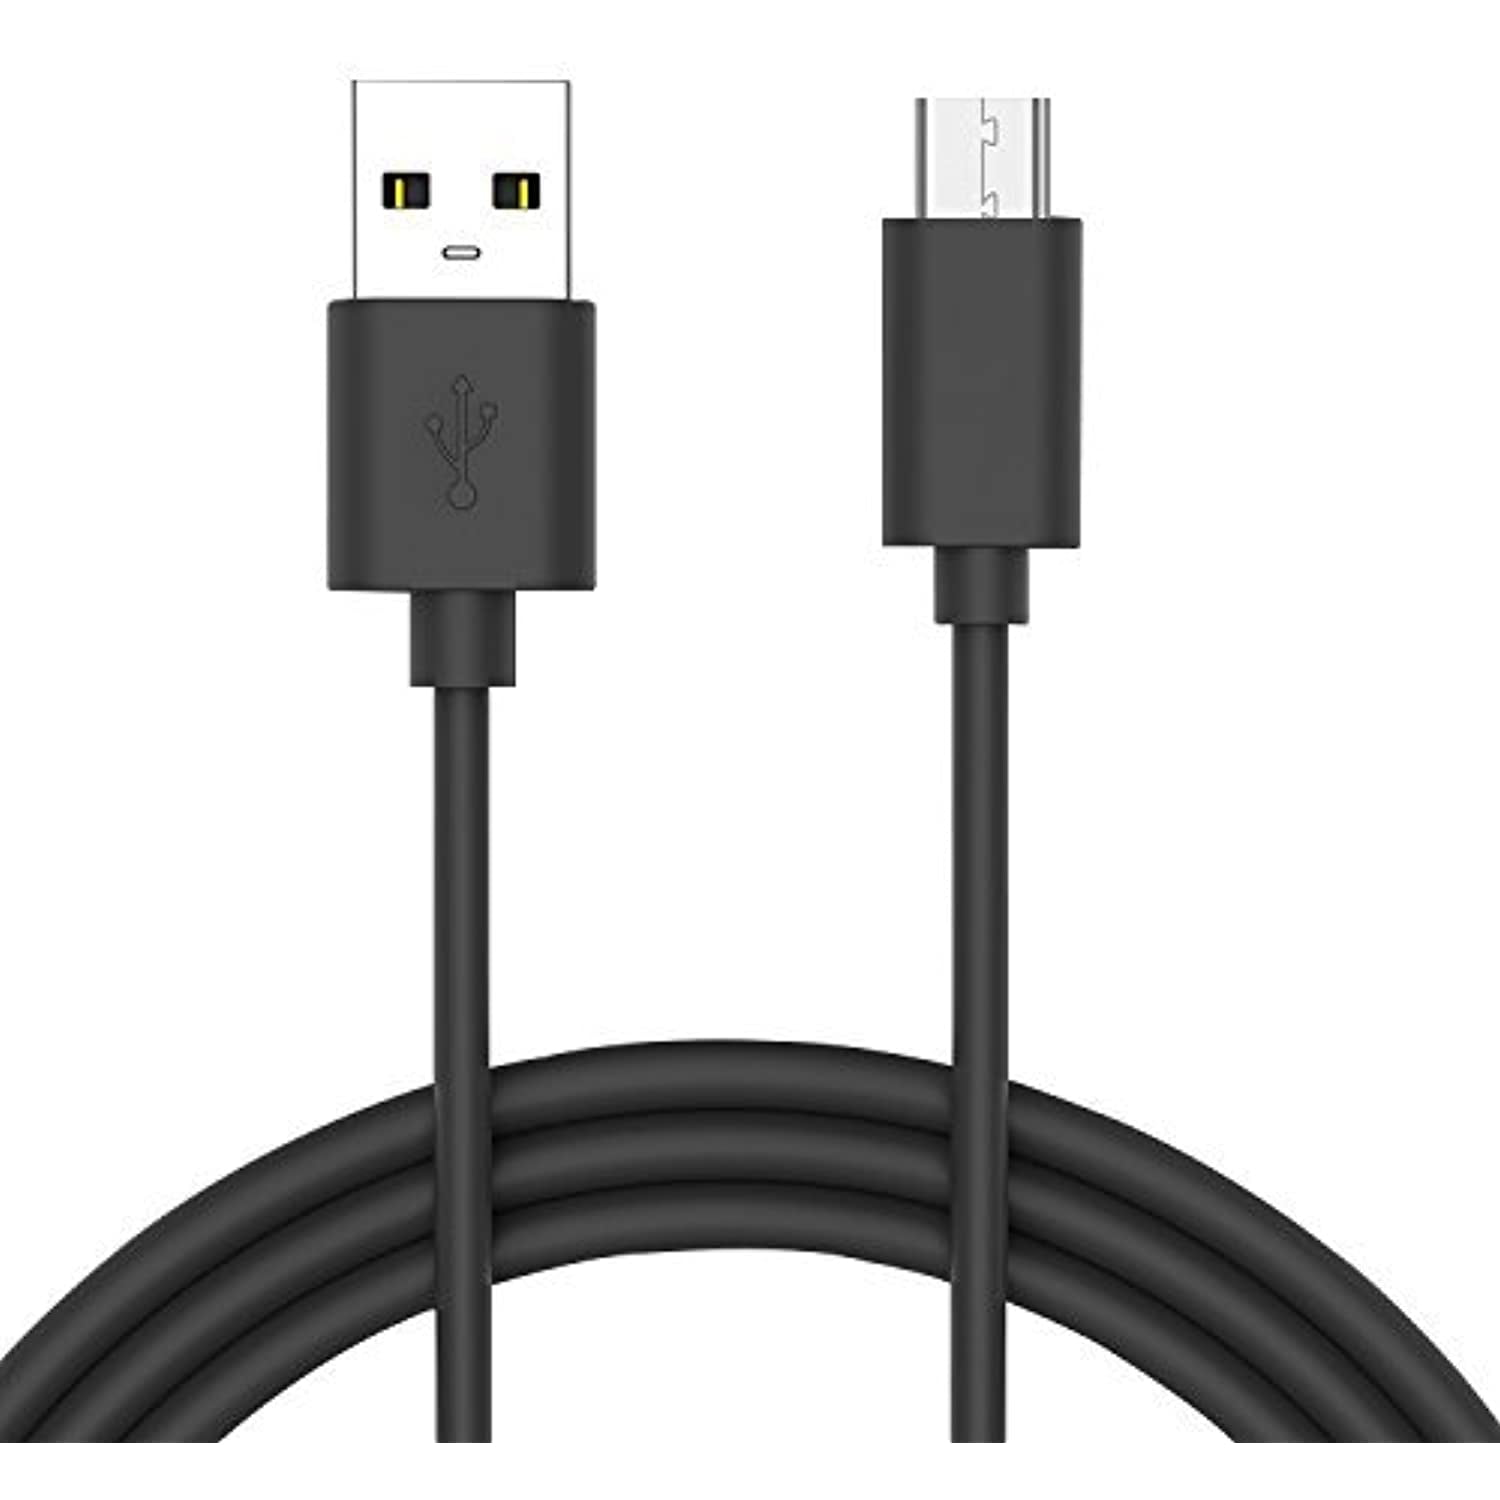 Eeejumpe 10ft Feet Long USB Power Cable/Cord for Amazon ...